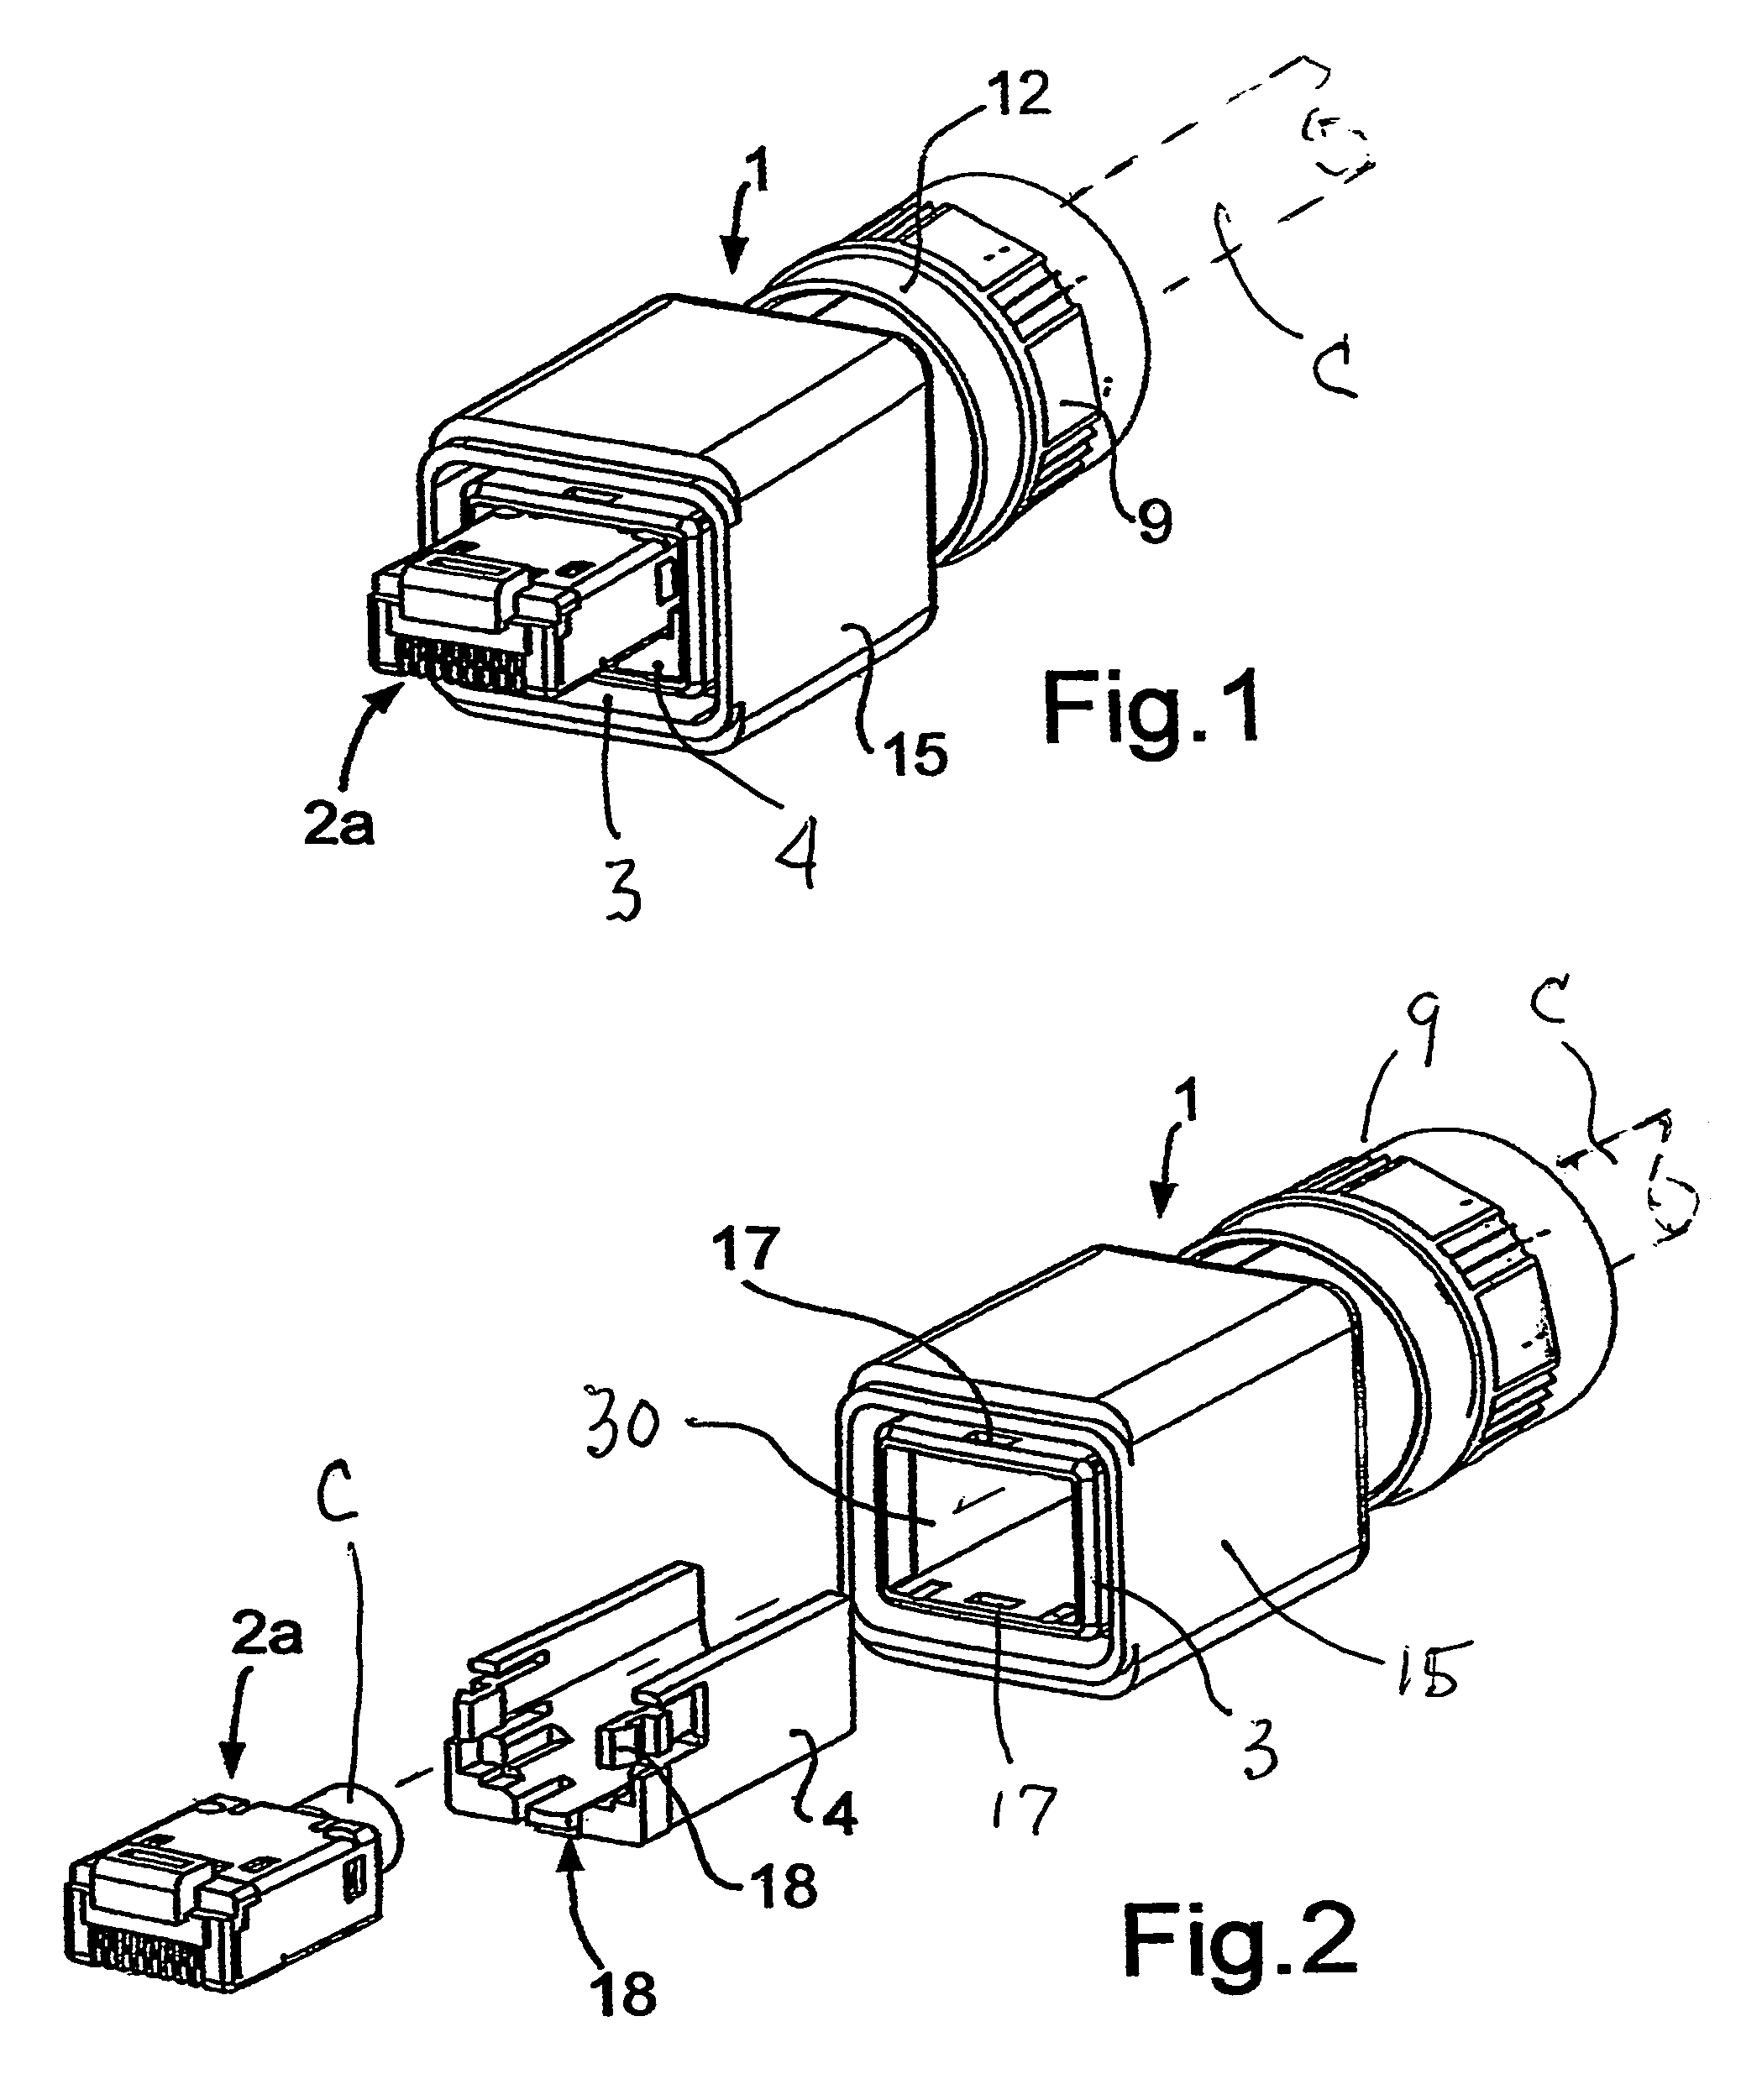 Adapter for attaching an insertion device to a cable fitting